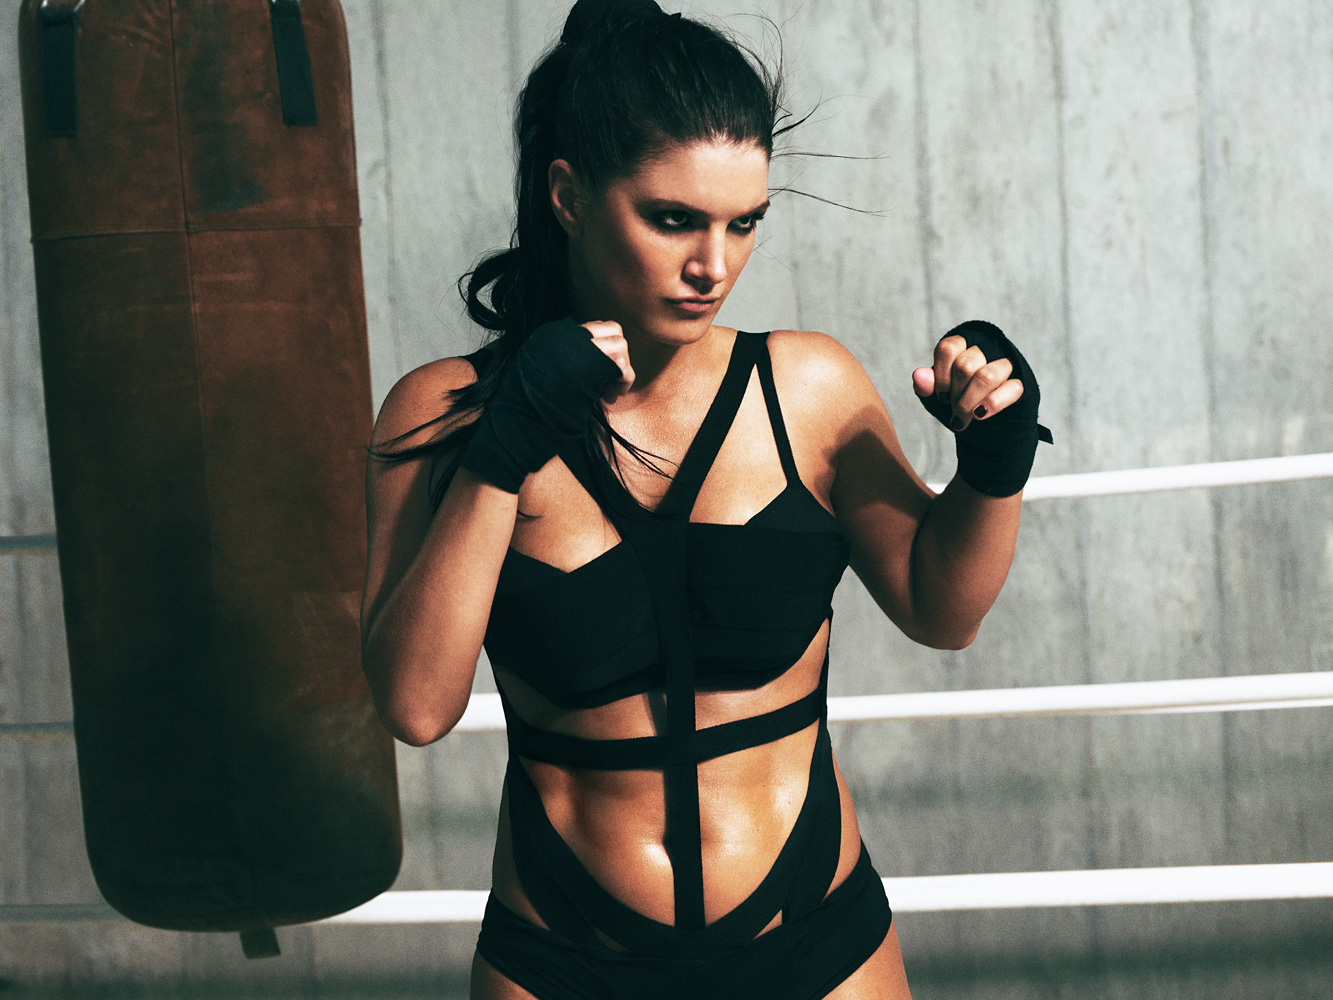 list of the top 10 hottest women of MMA, including Gina Carano and Arianny ...